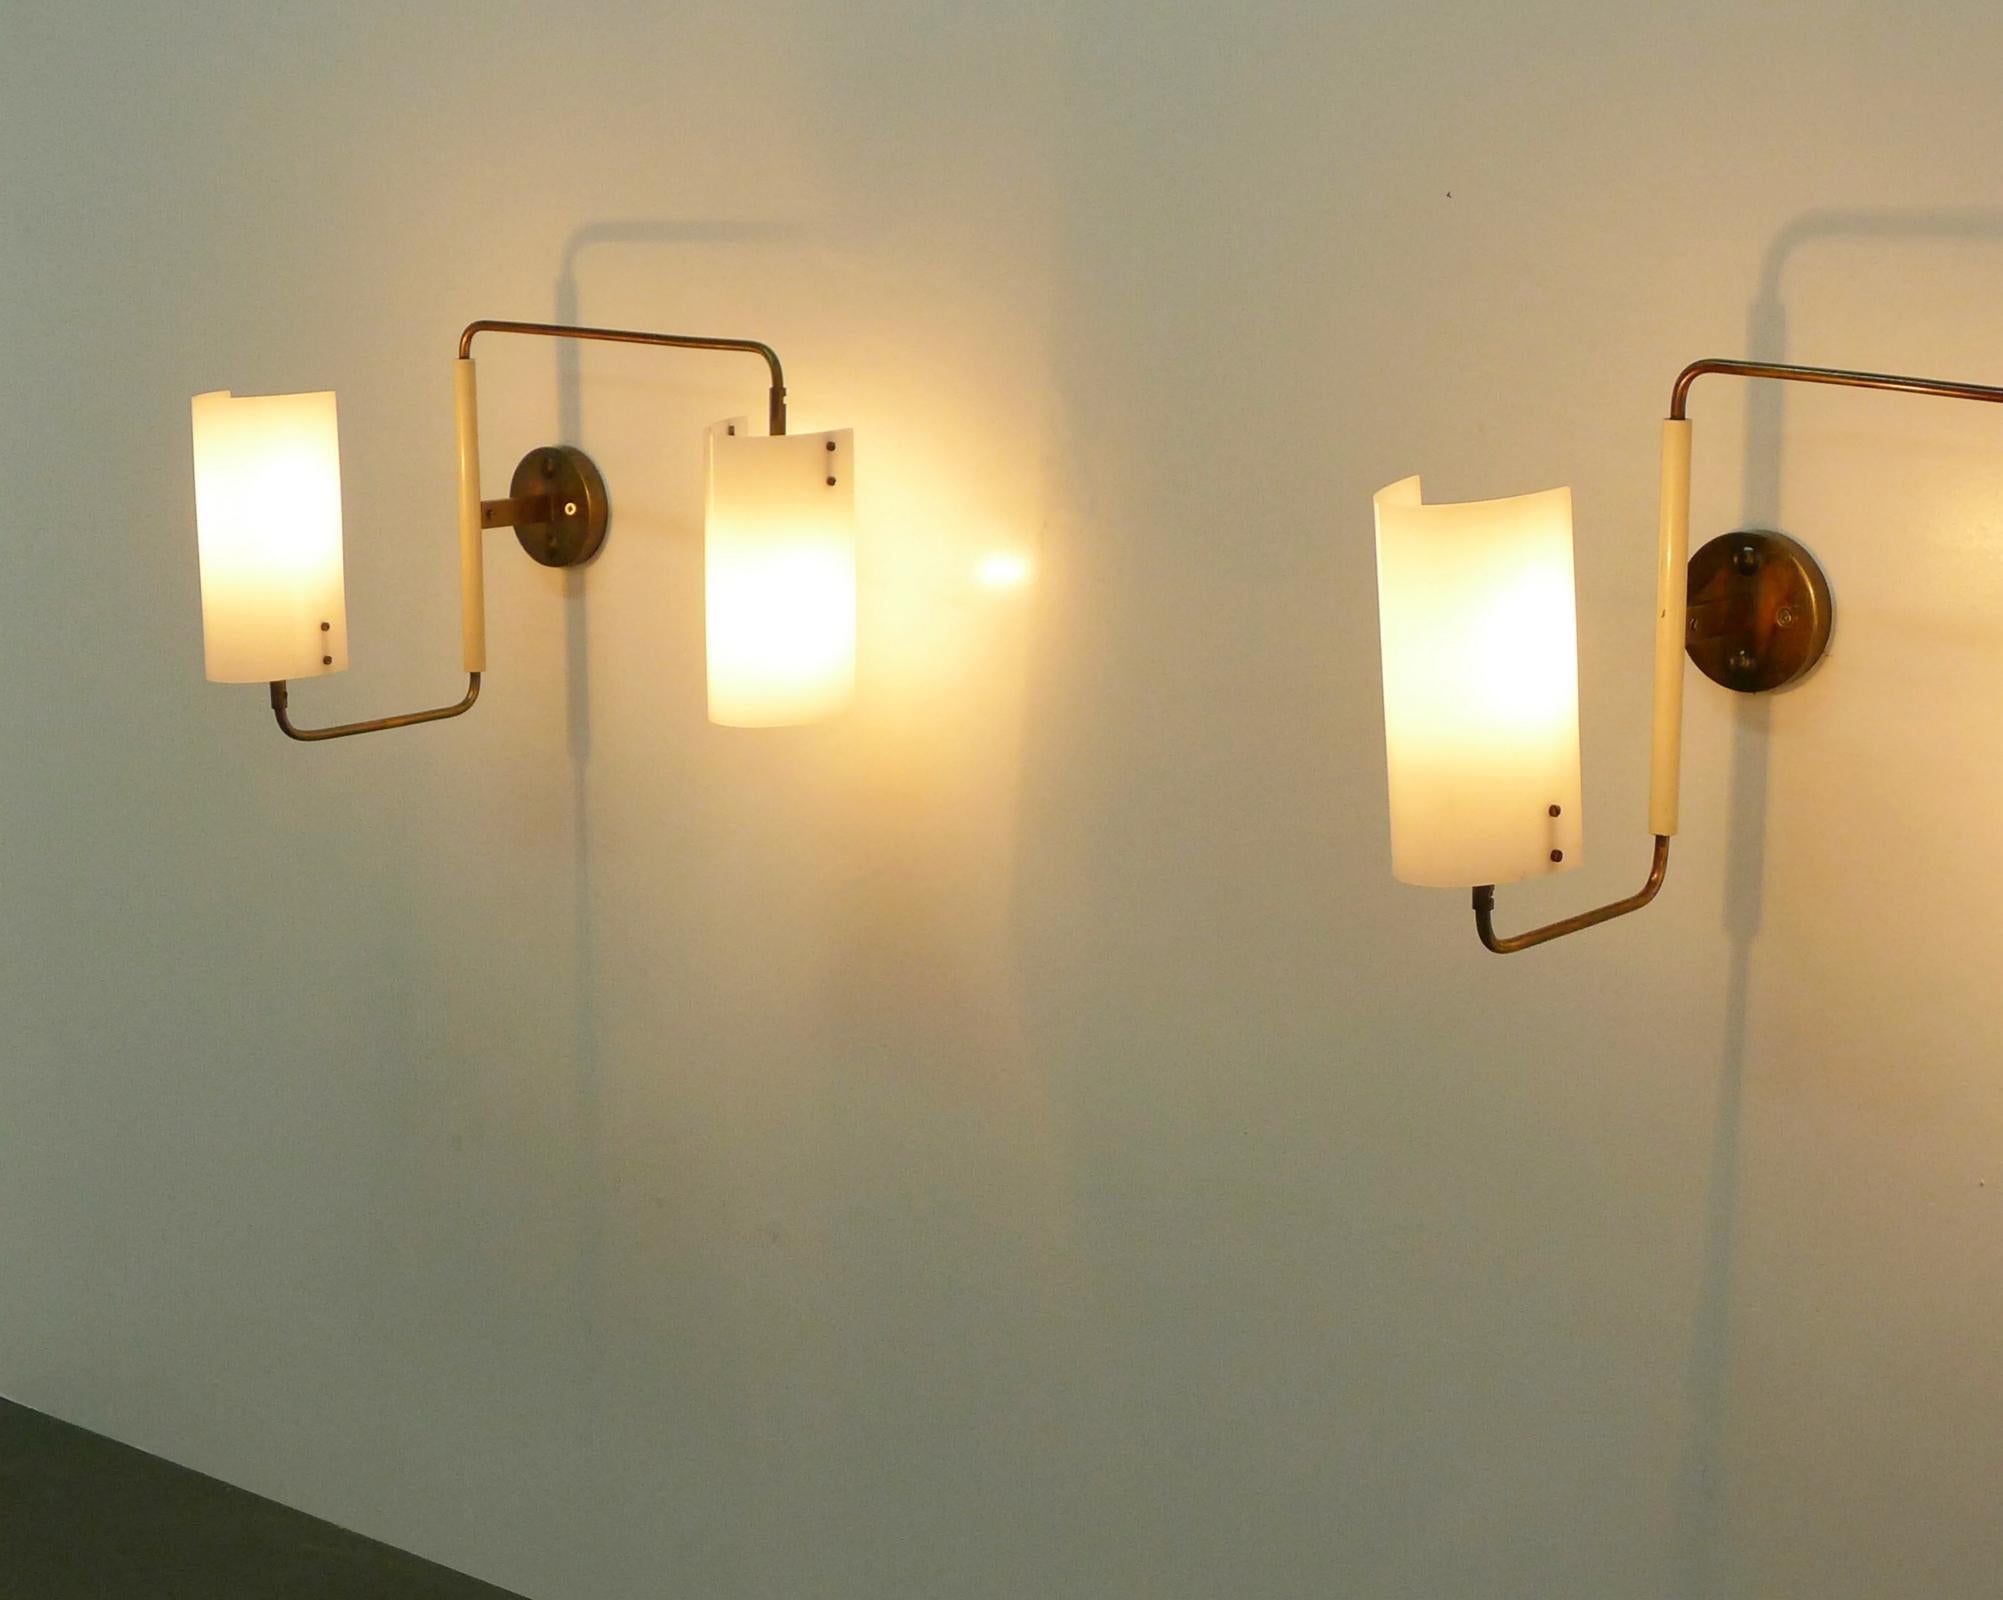 A rare pair of twin-light adjustable wall lights, designed in 1955 by Tito Agnoli and manufactured in the 1950s by Oluce.

The white opal perspex shades can be turned slightly to adjust the lighting as required and sit on articulated brass arms of